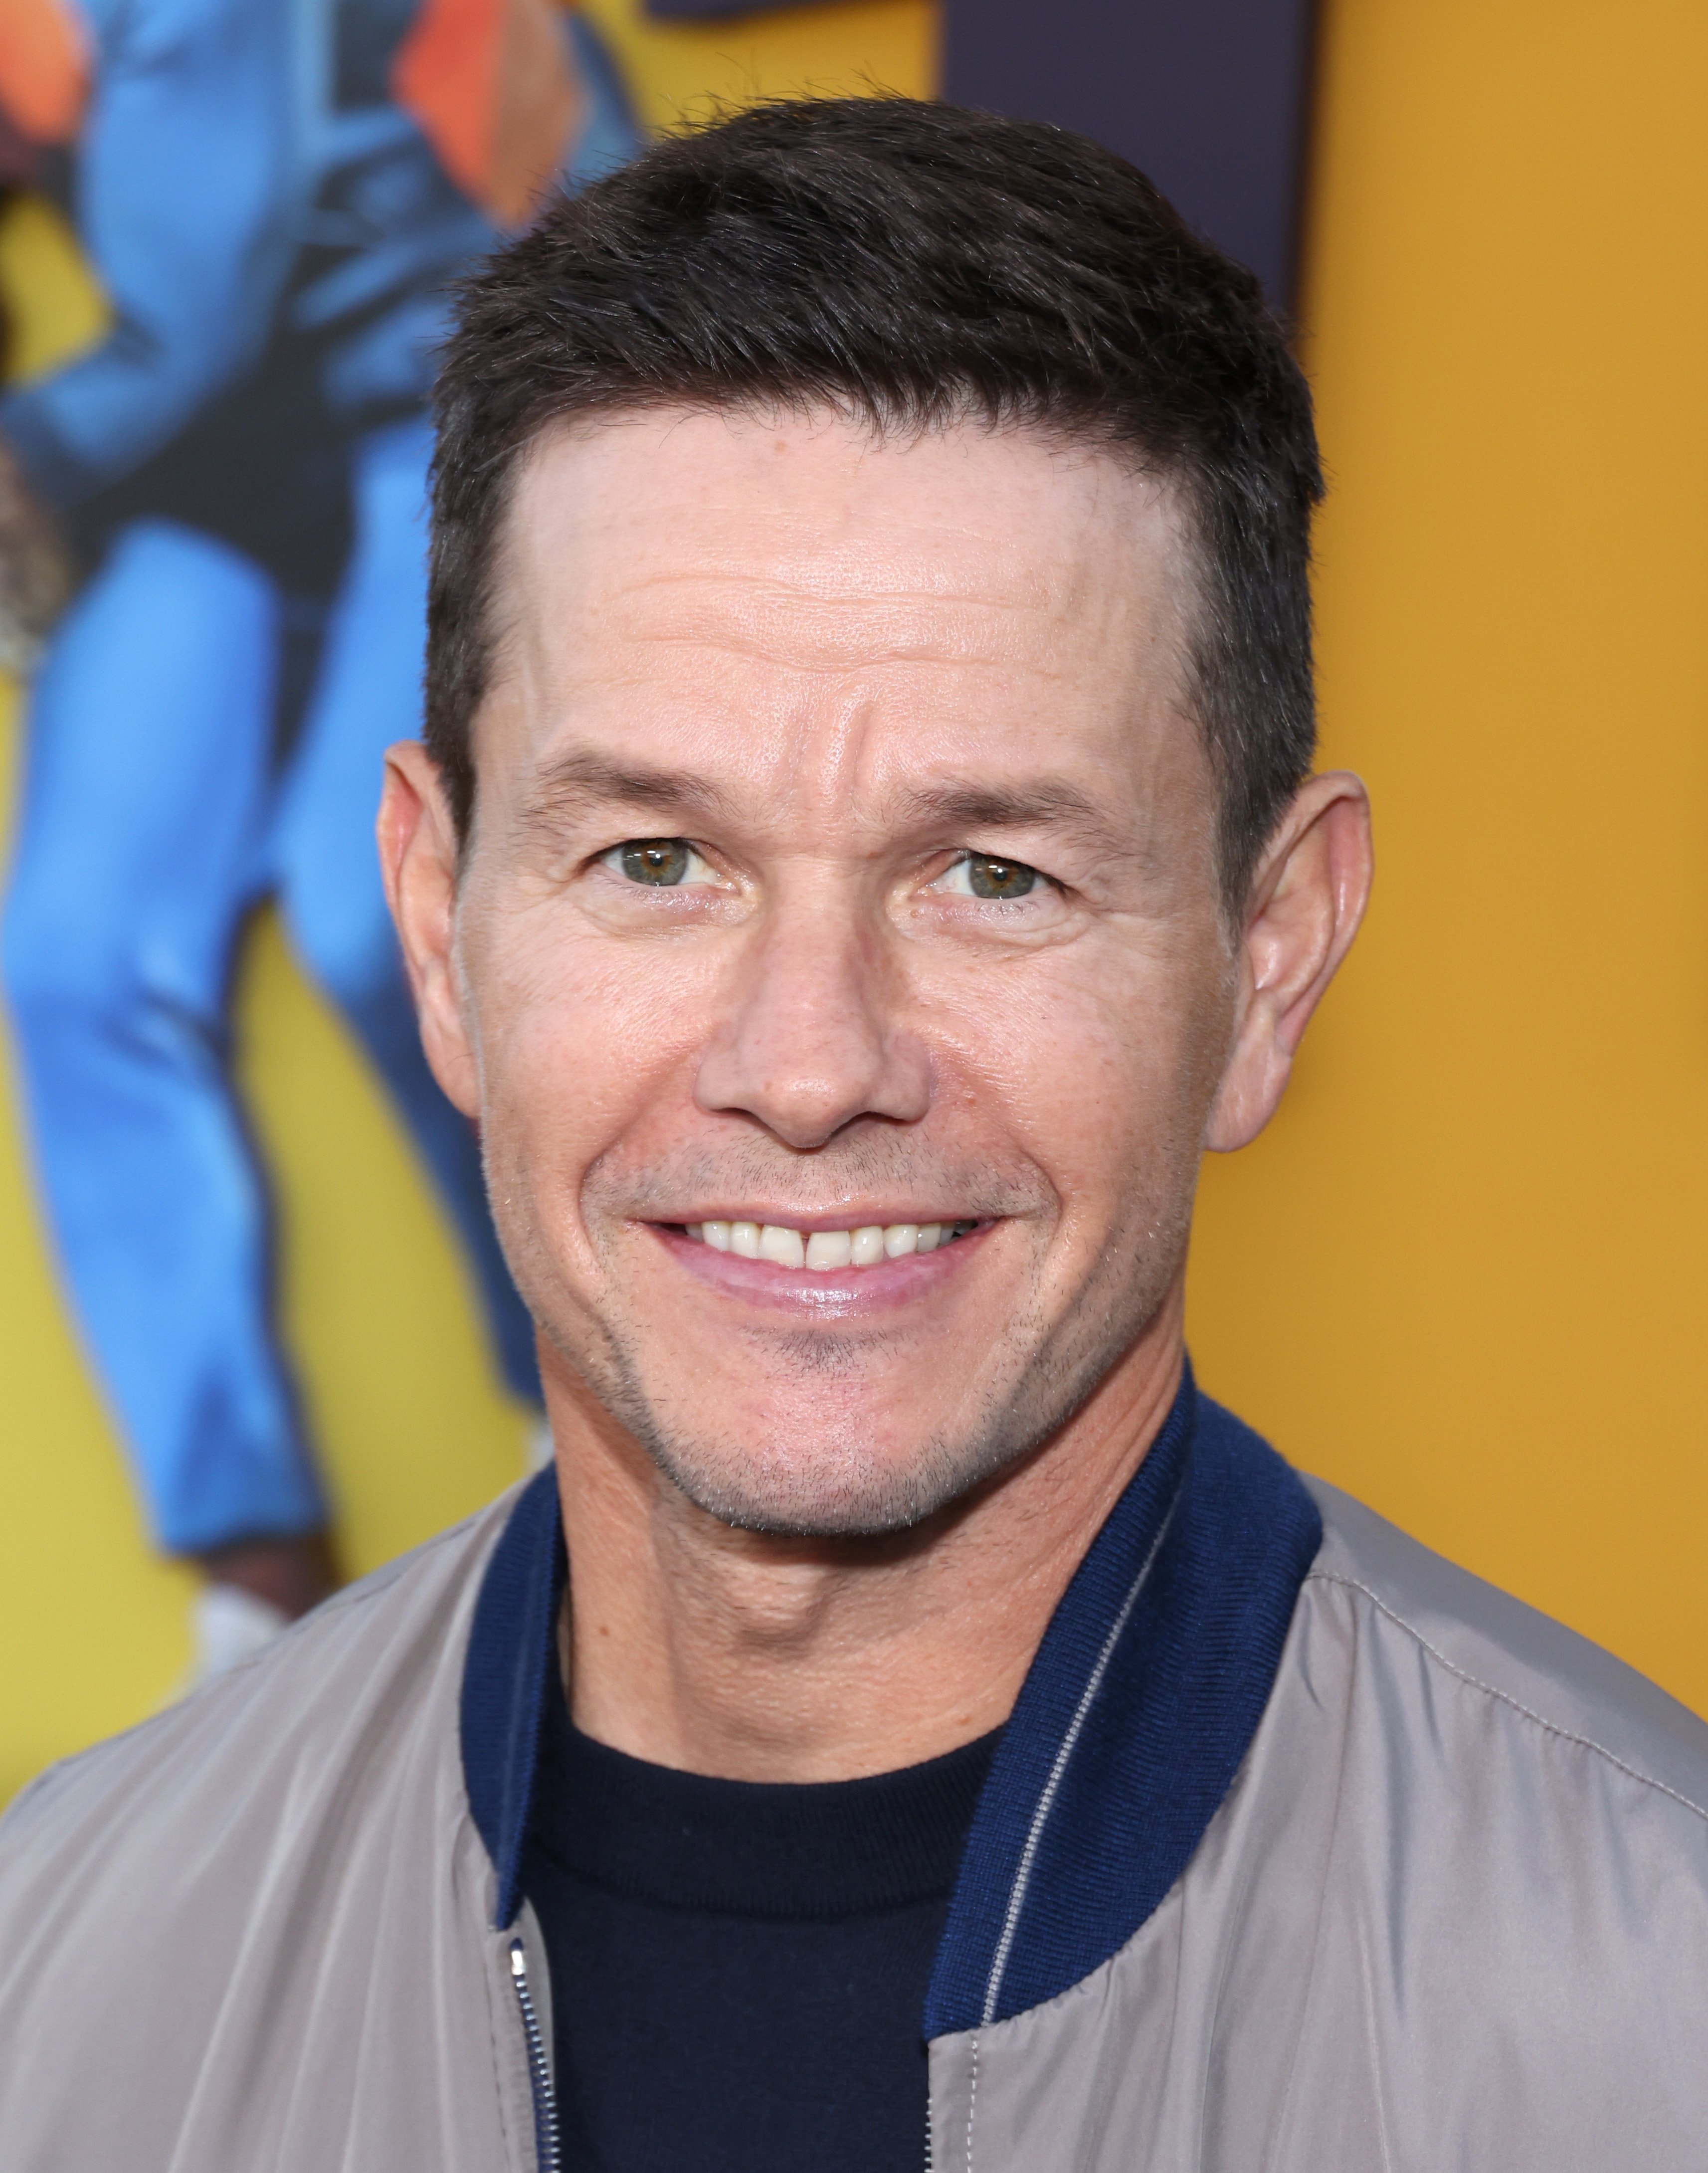 Mark Wahlberg at the Netflix premiere in Los Angeles "My time" at Regency Village Theater on August 23, 2022 in Los Angeles, California.  |  Source: Getty Images